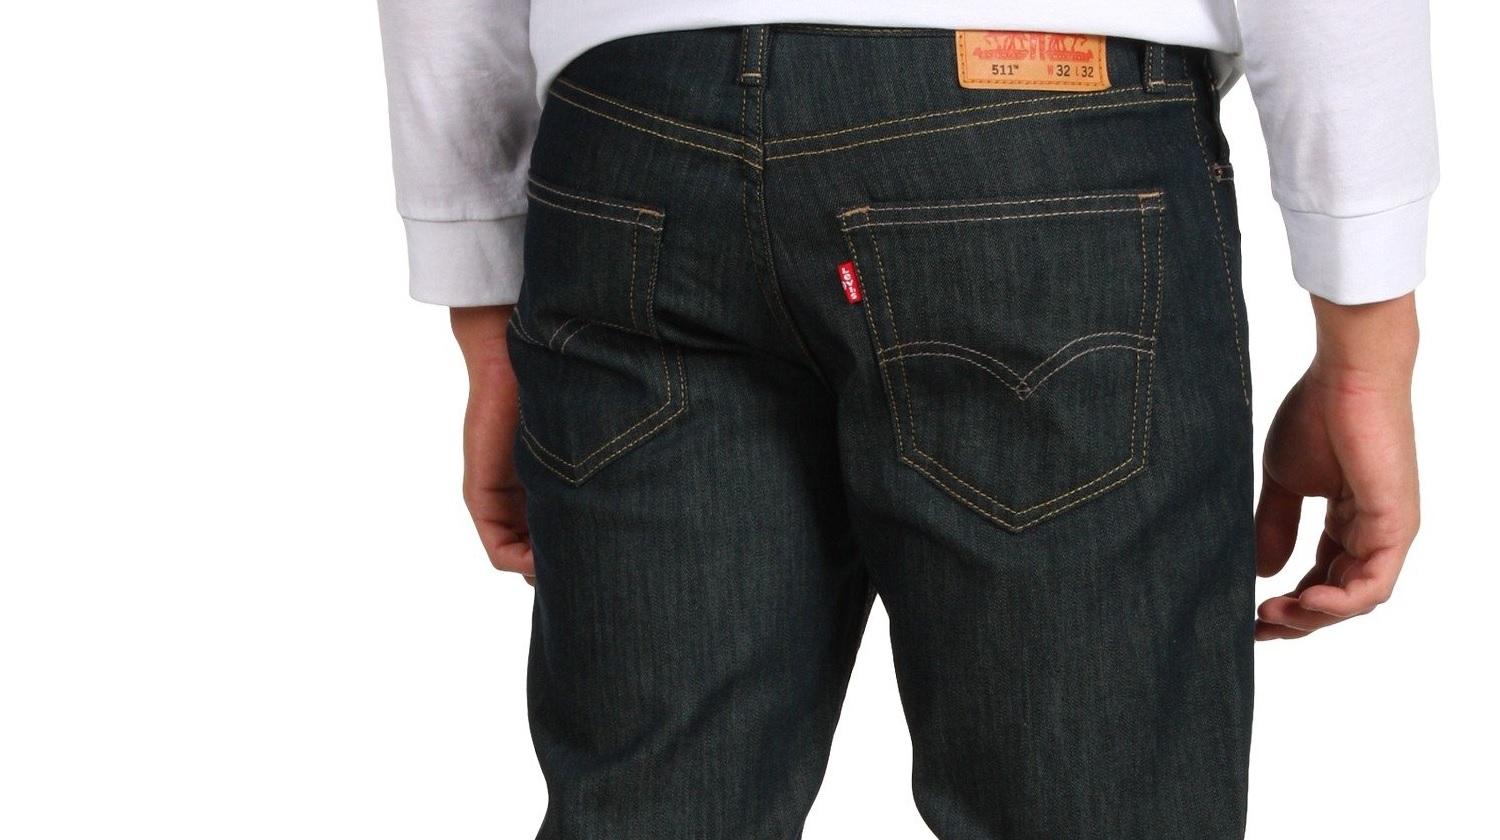 Steal Alert: Levi's 511 Dark Wash Jeans for $ with Free Shipping